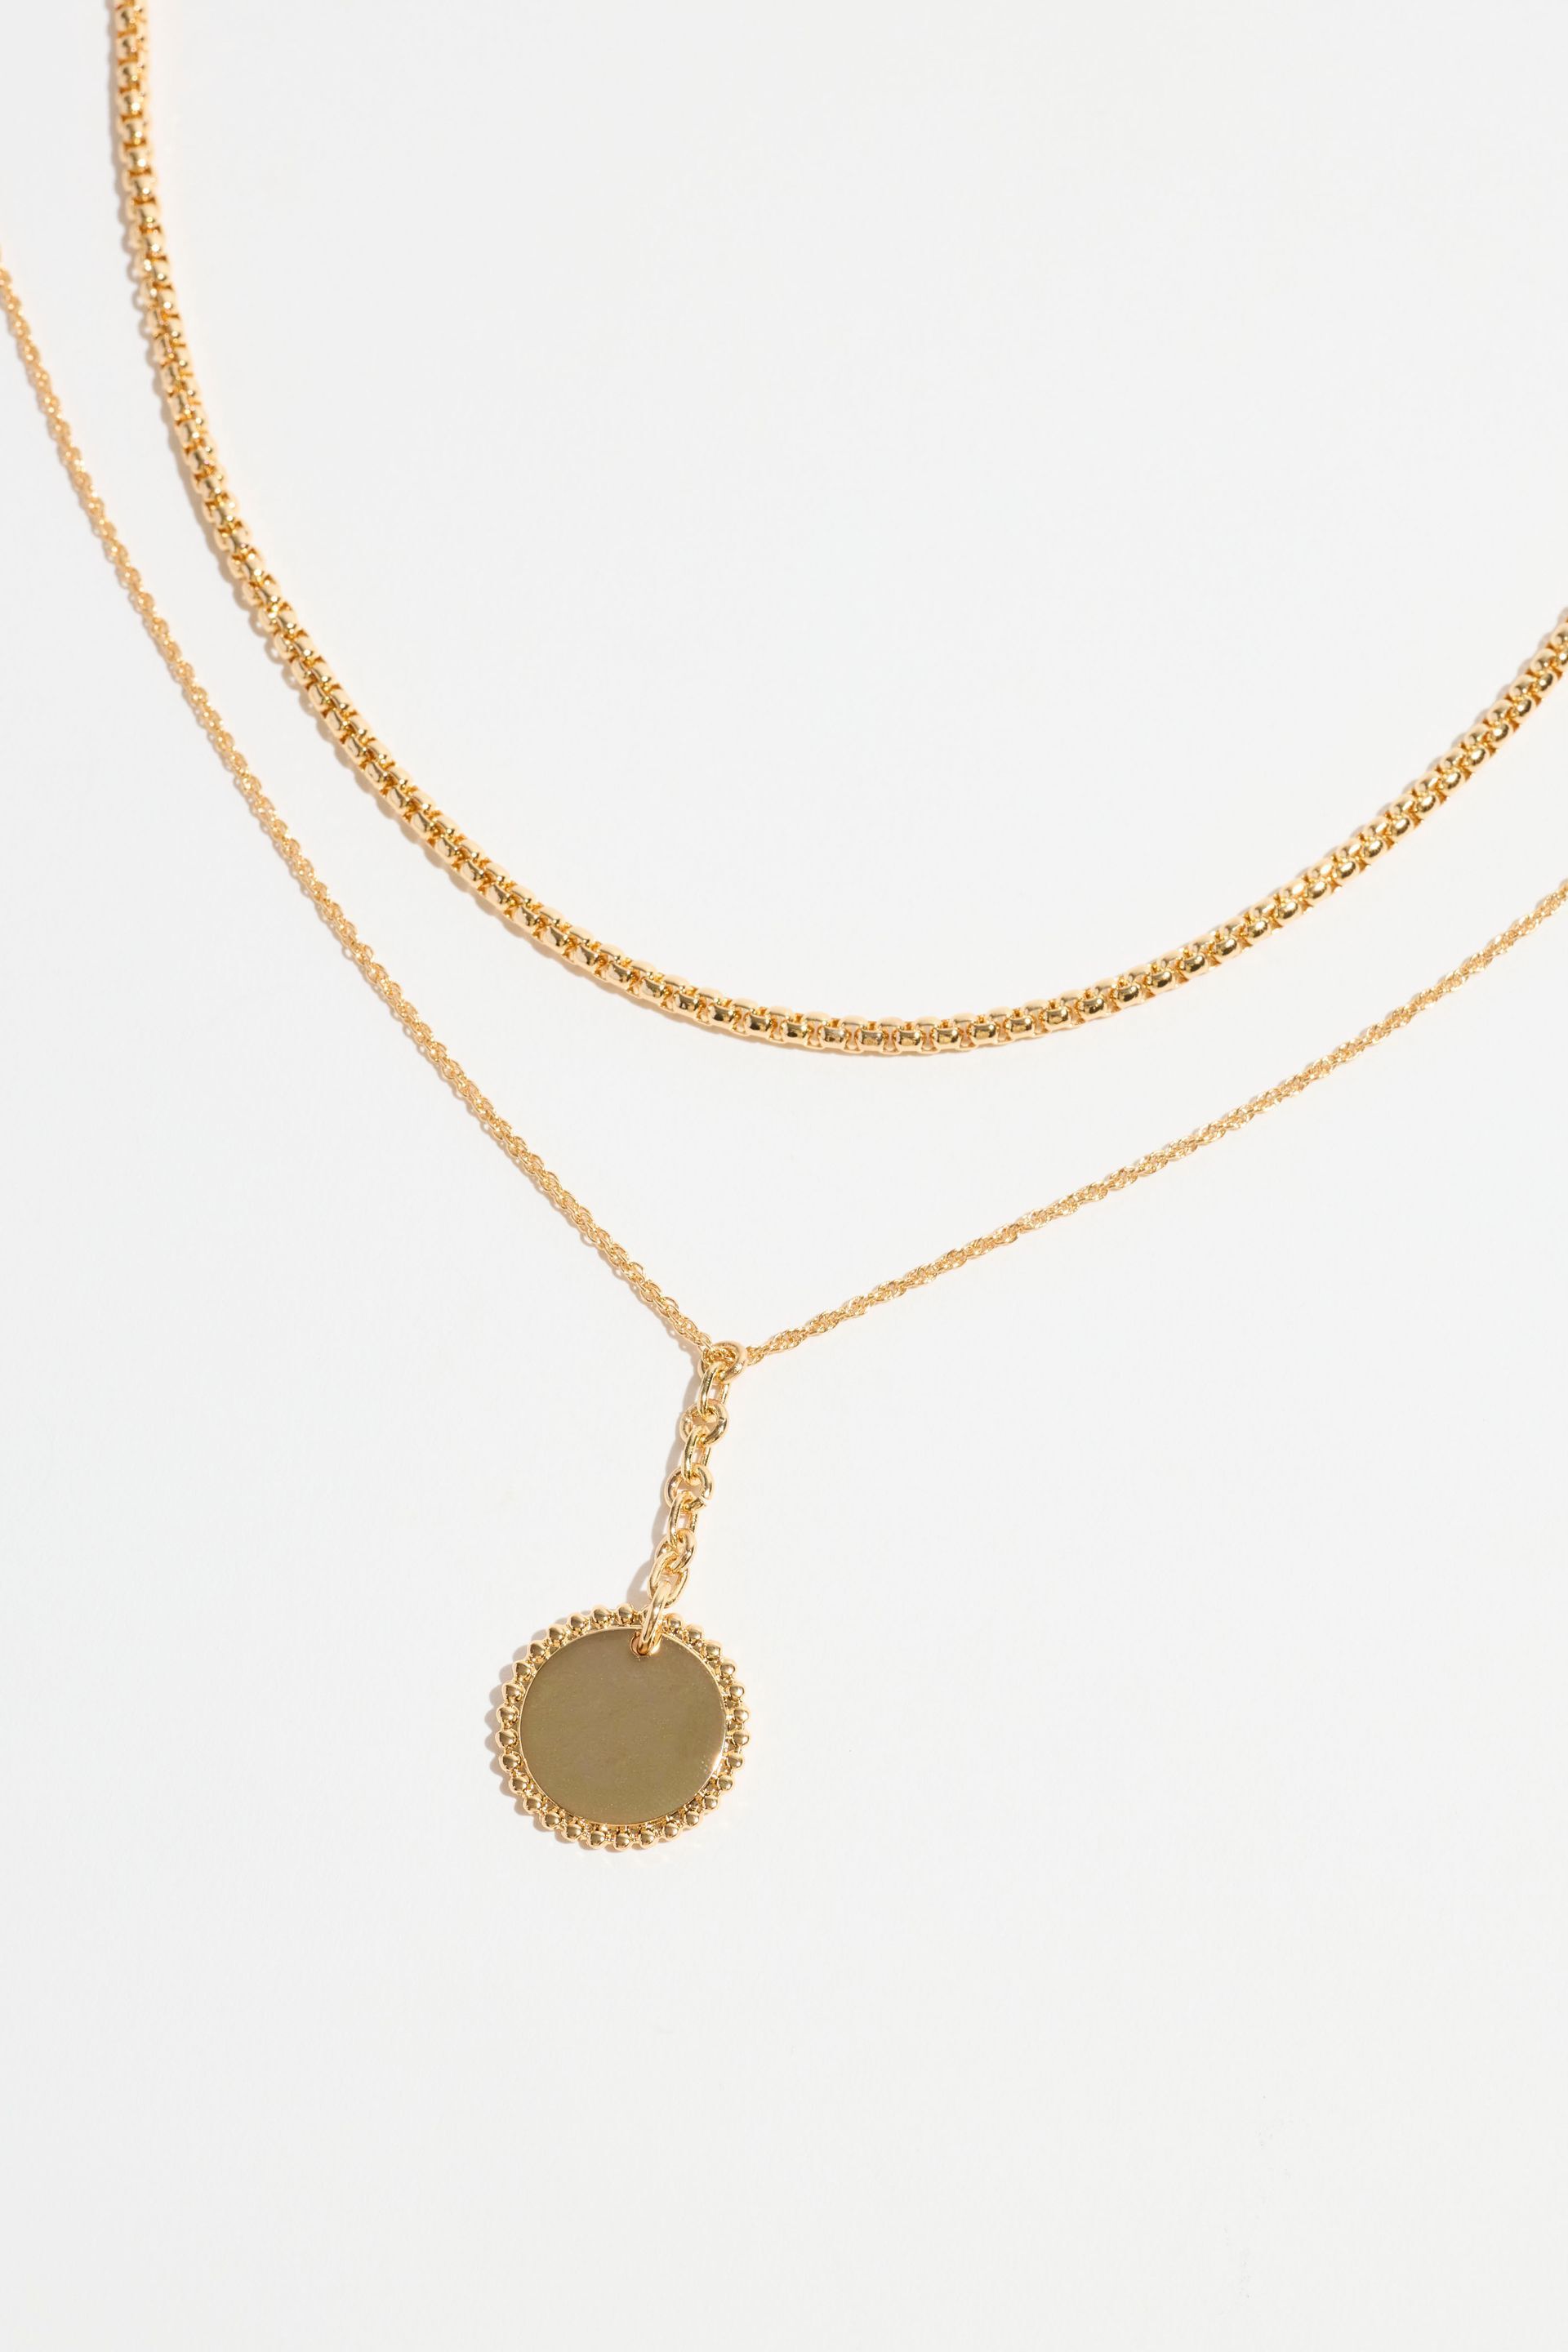 Layered Textured Chain & Medallion Necklace